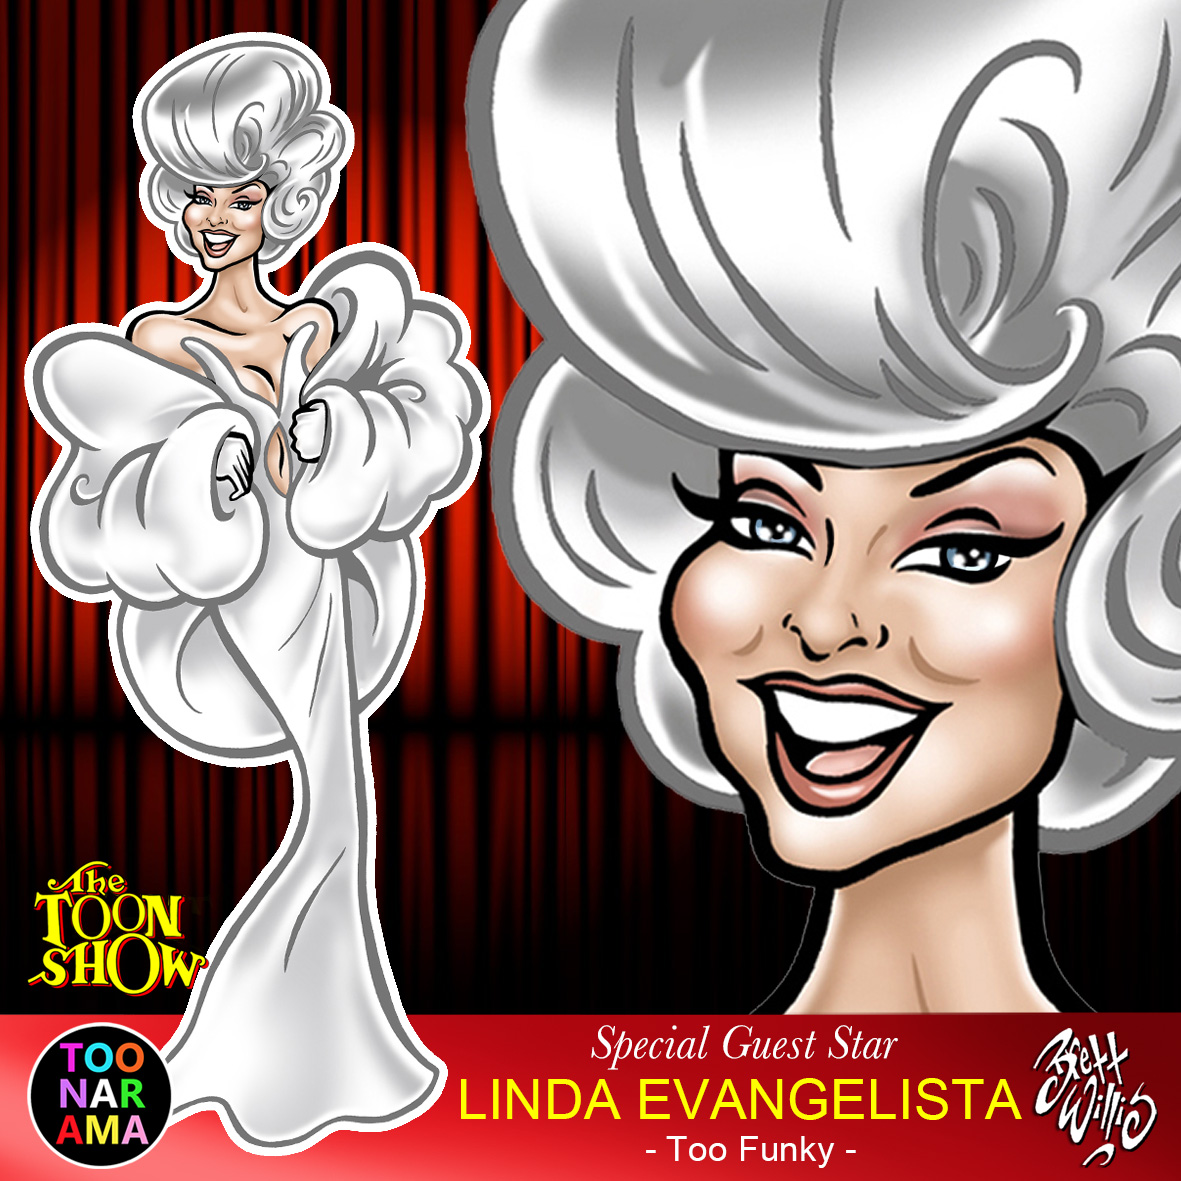 Happy Birthday The TOON Show Special Guest Star LINDA EVANGELISTA - Too Funky Supermodel - #HappyBirthday #supermodel #LindaEvangelista #toonarama